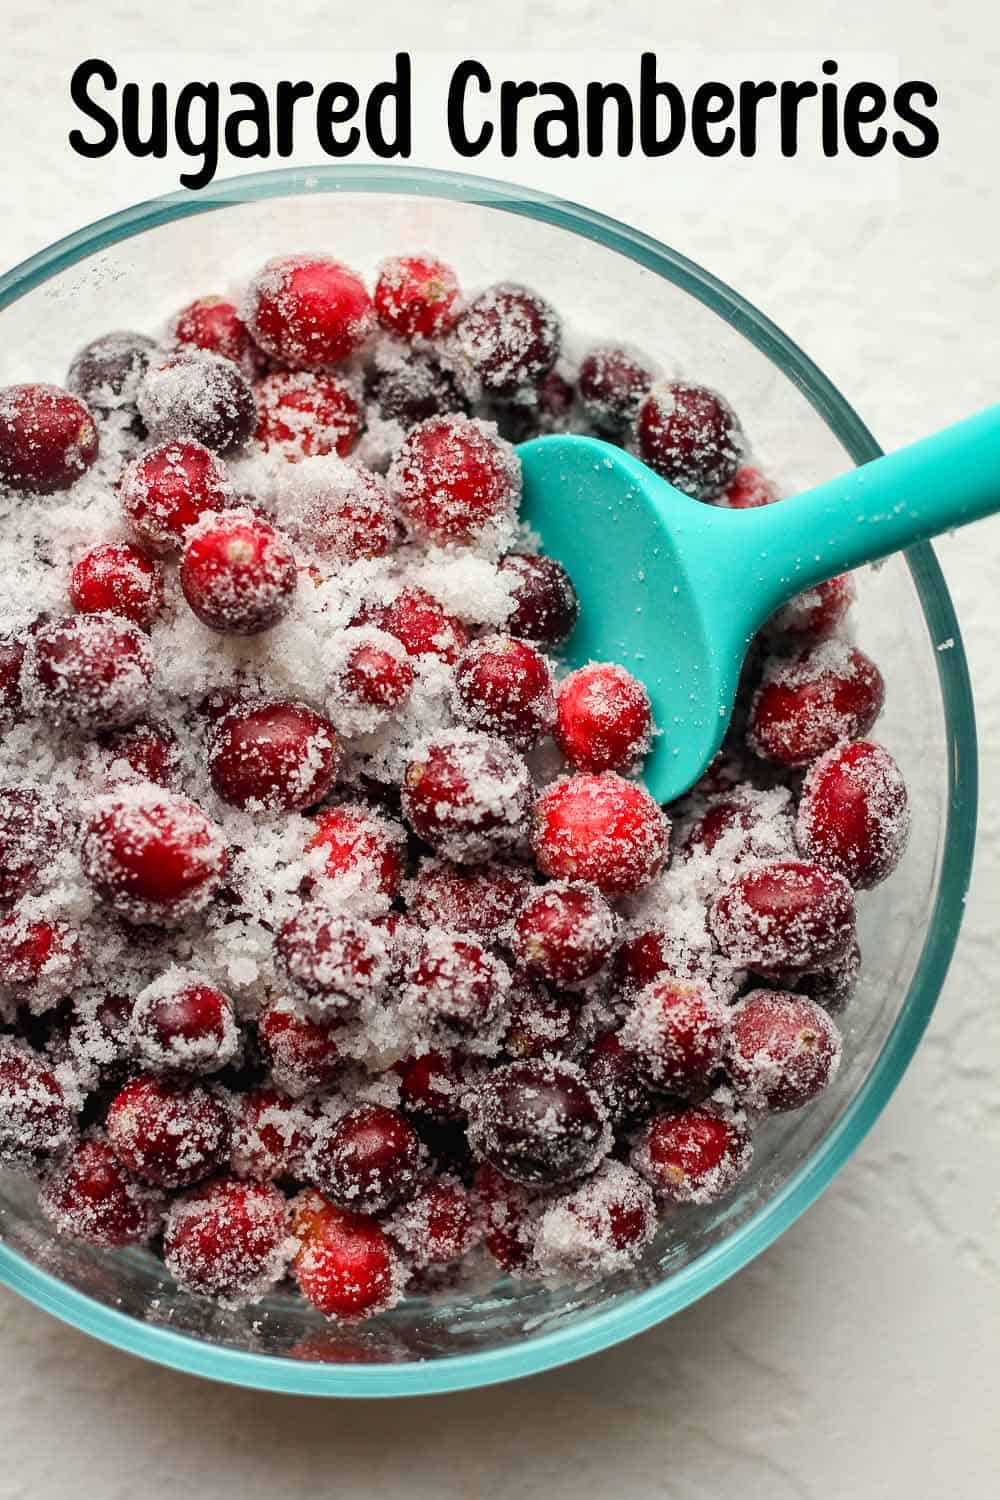 A bowl of sugared cranberries.